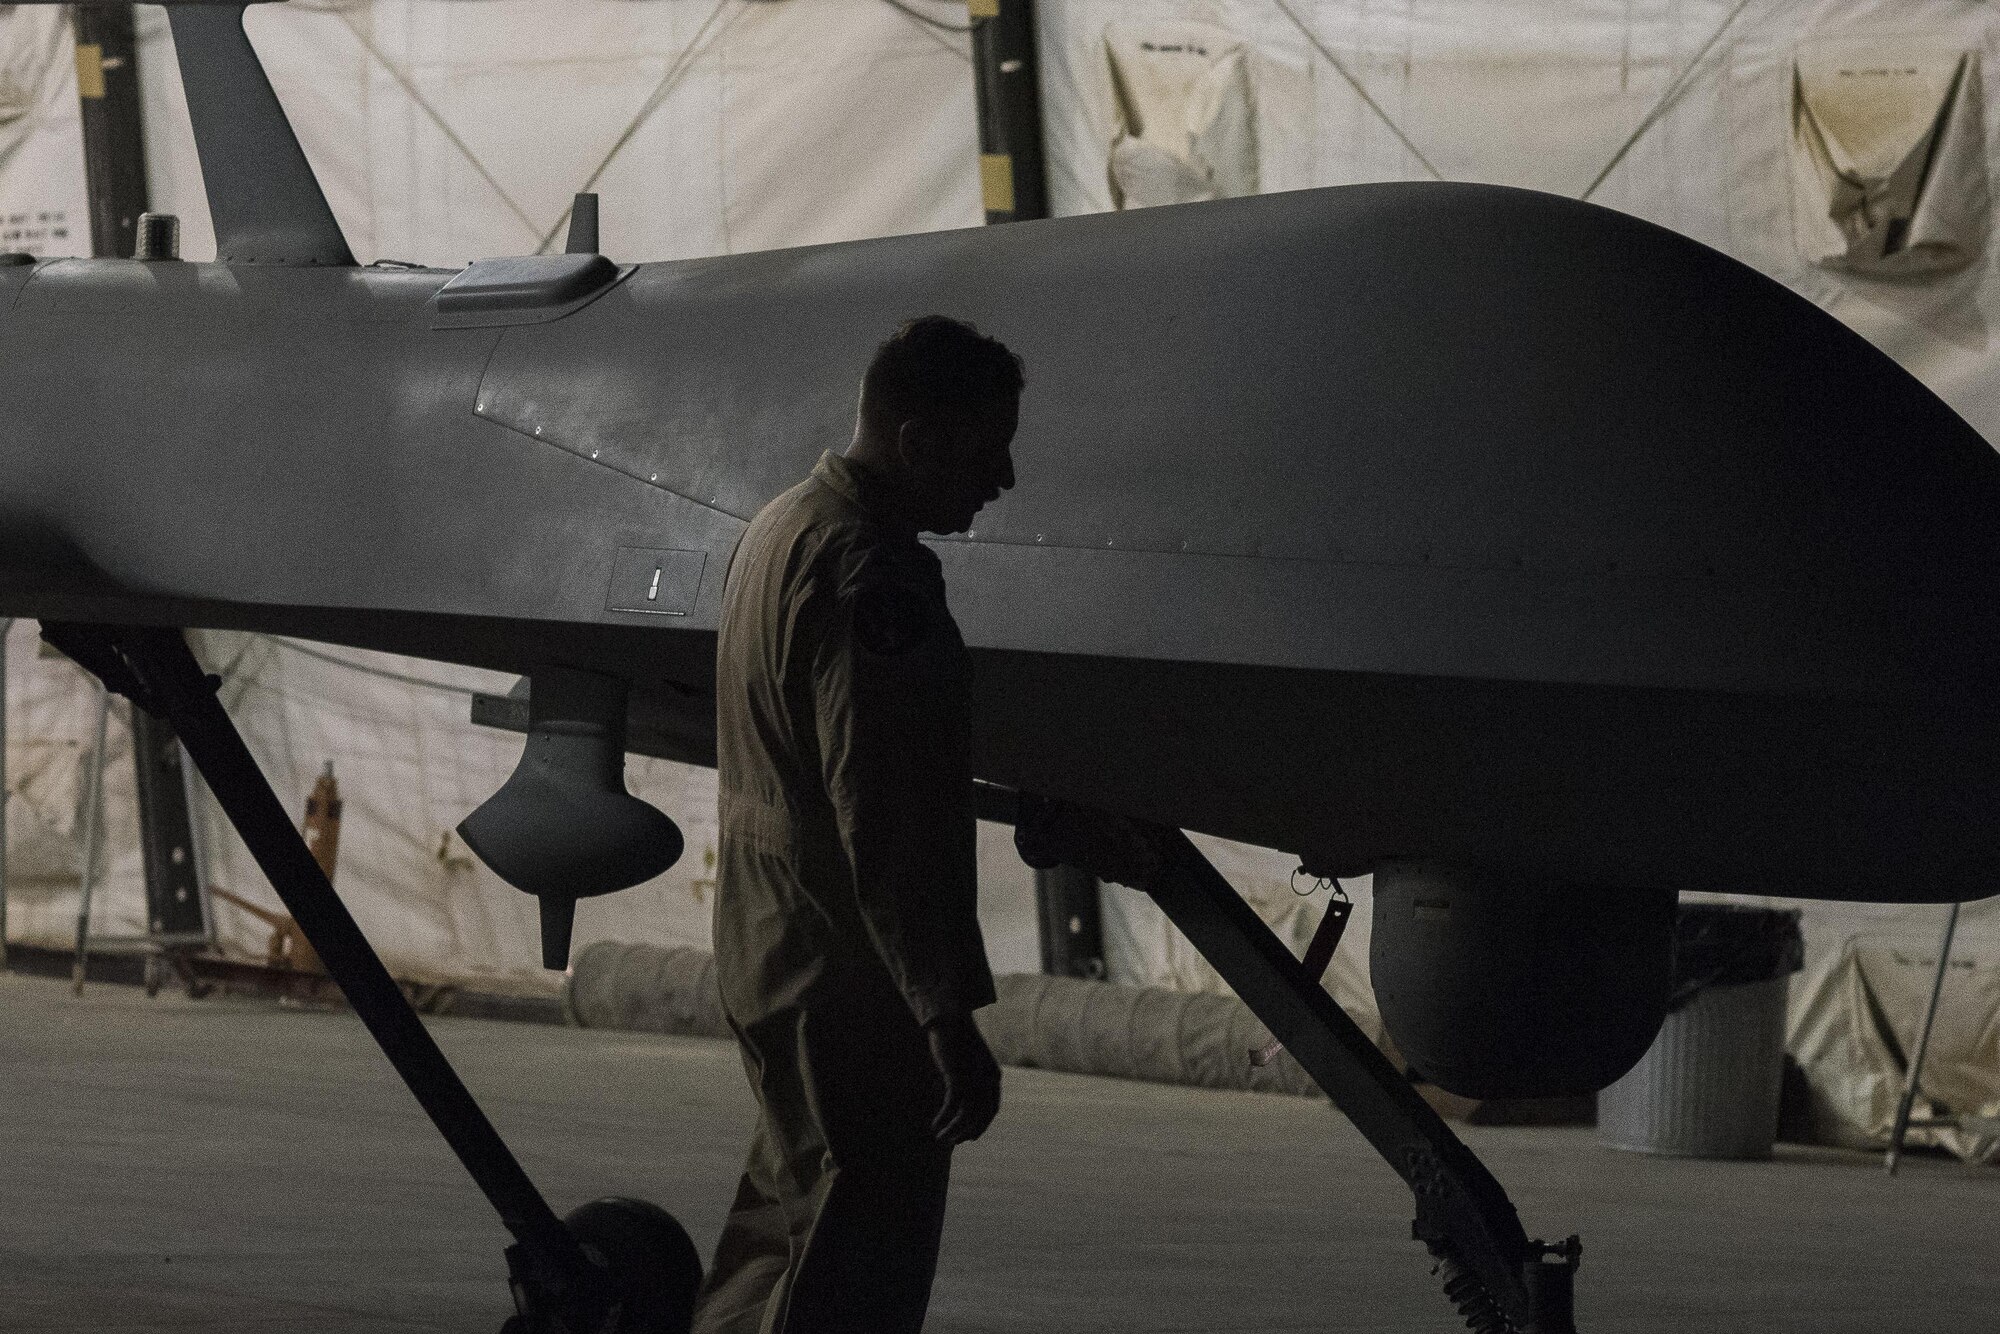 Lt. Col. Douglas, 361st Expeditionary Attack Squadron commander, inspects an MQ-1B Predator after its last combat flight assigned to the 361st EATKS, July 2, 2017, in Southwest Asia. In the 18 months the MQ-1B was assigned to the 361st Expeditionary Reconnaissance Squadron, later designated as the 361st EATKS, its aircrew flew the aircraft on more than 2,000 combat missions, 36,000 persistence attack and reconnaissance hours, and fired 358 AGM-114 Hellfire missiles, greatly contributing to the fight against ISIS. (U.S. Air Force photo/Senior Airman Damon Kasberg)